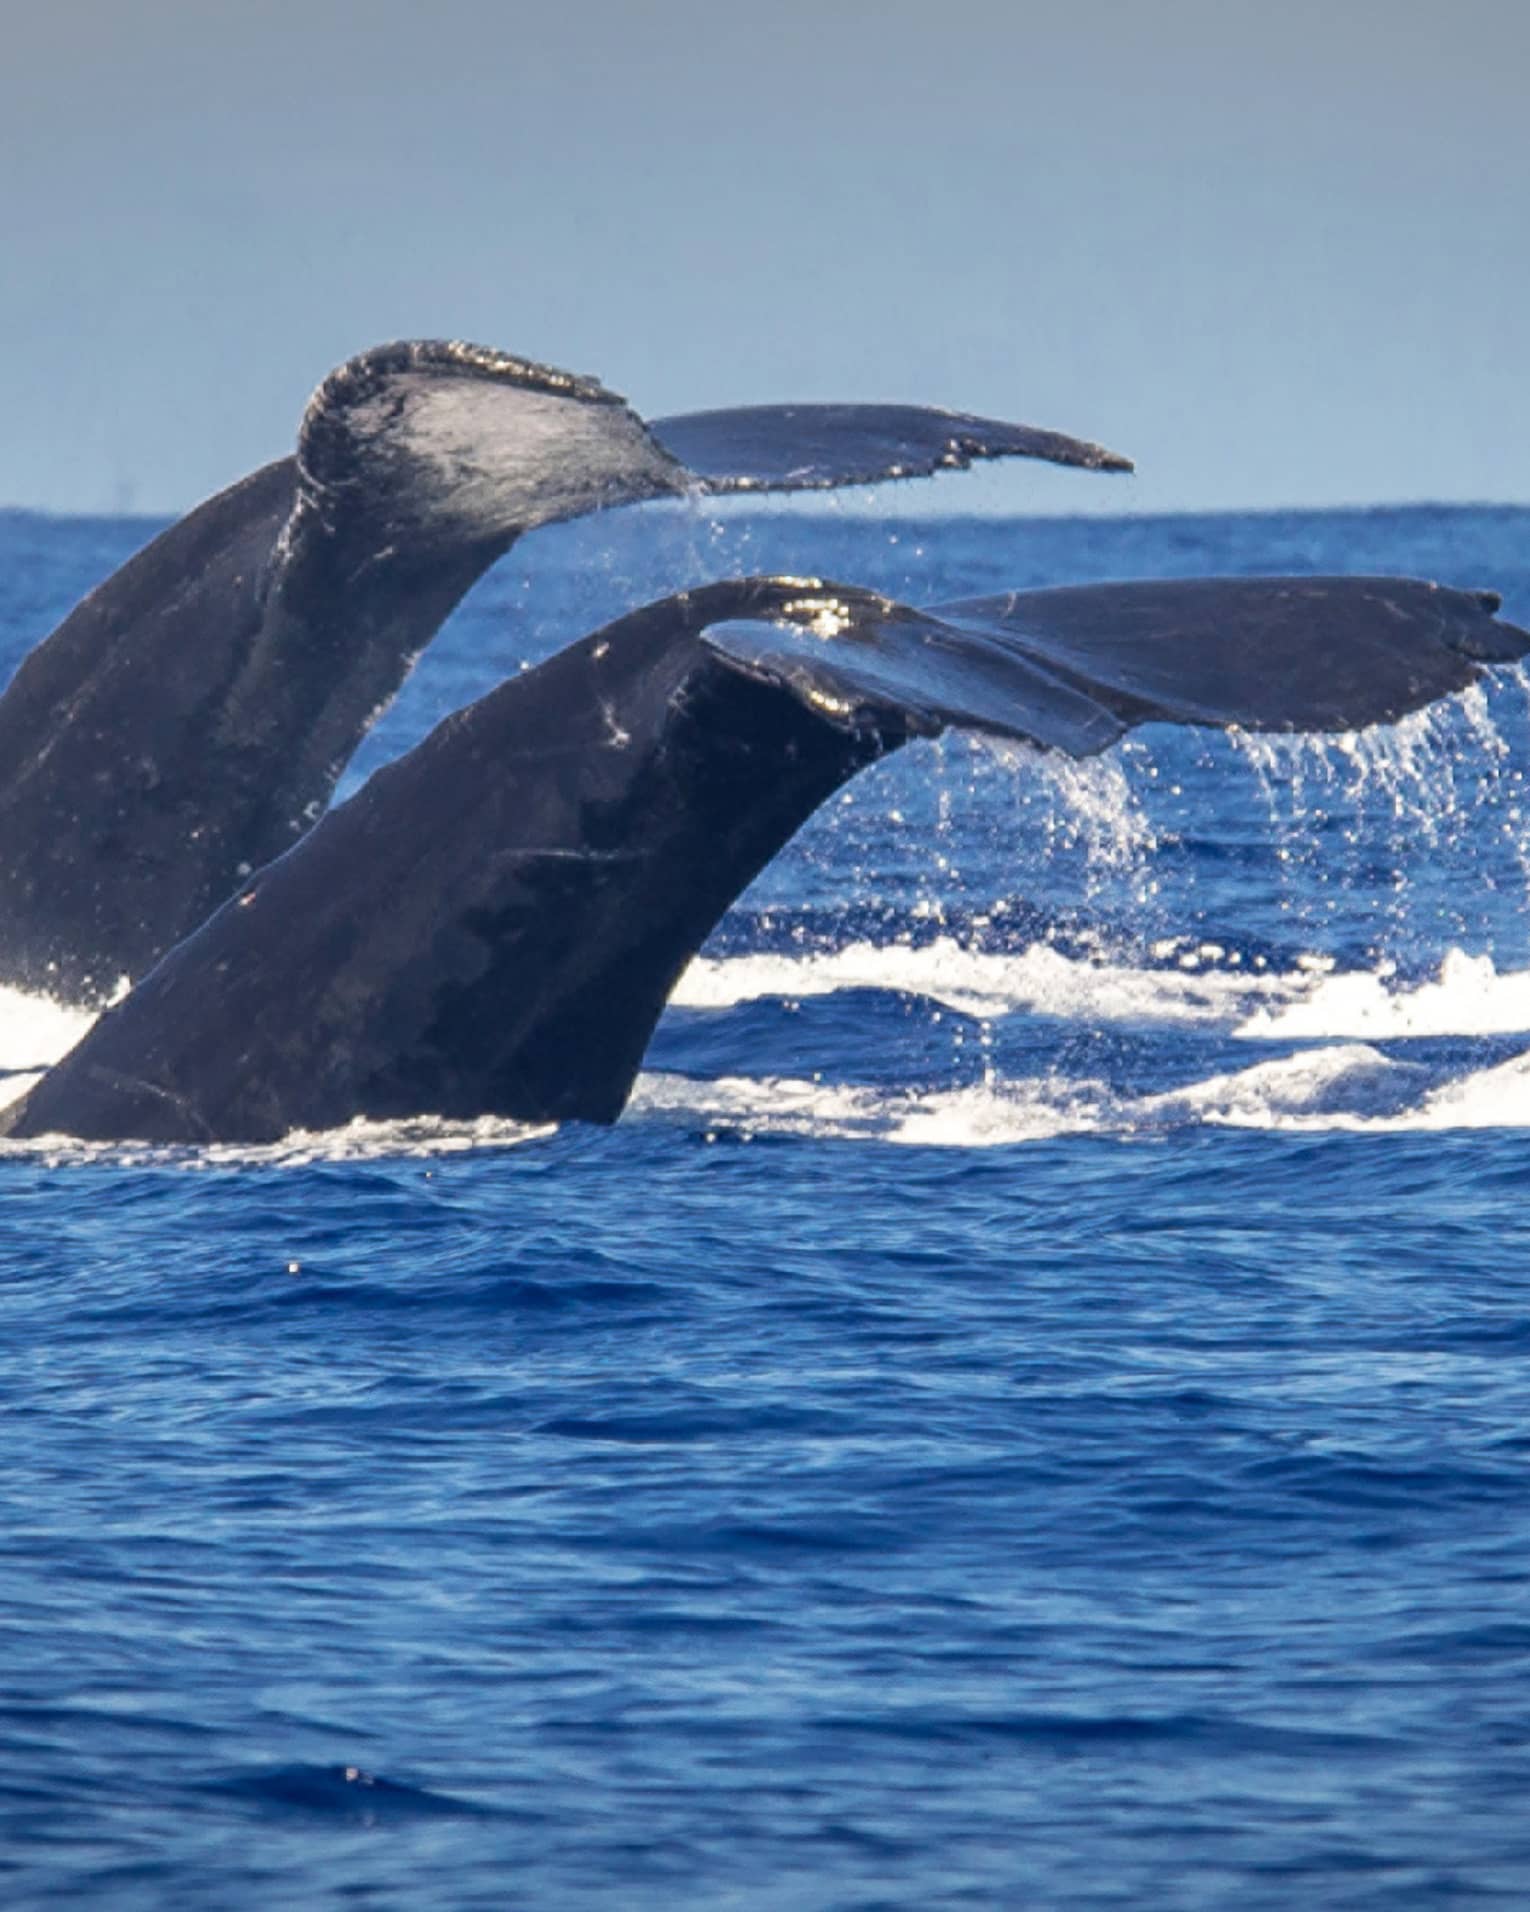 The tails of two humpback whales rise above the ocean off the coast of Maui